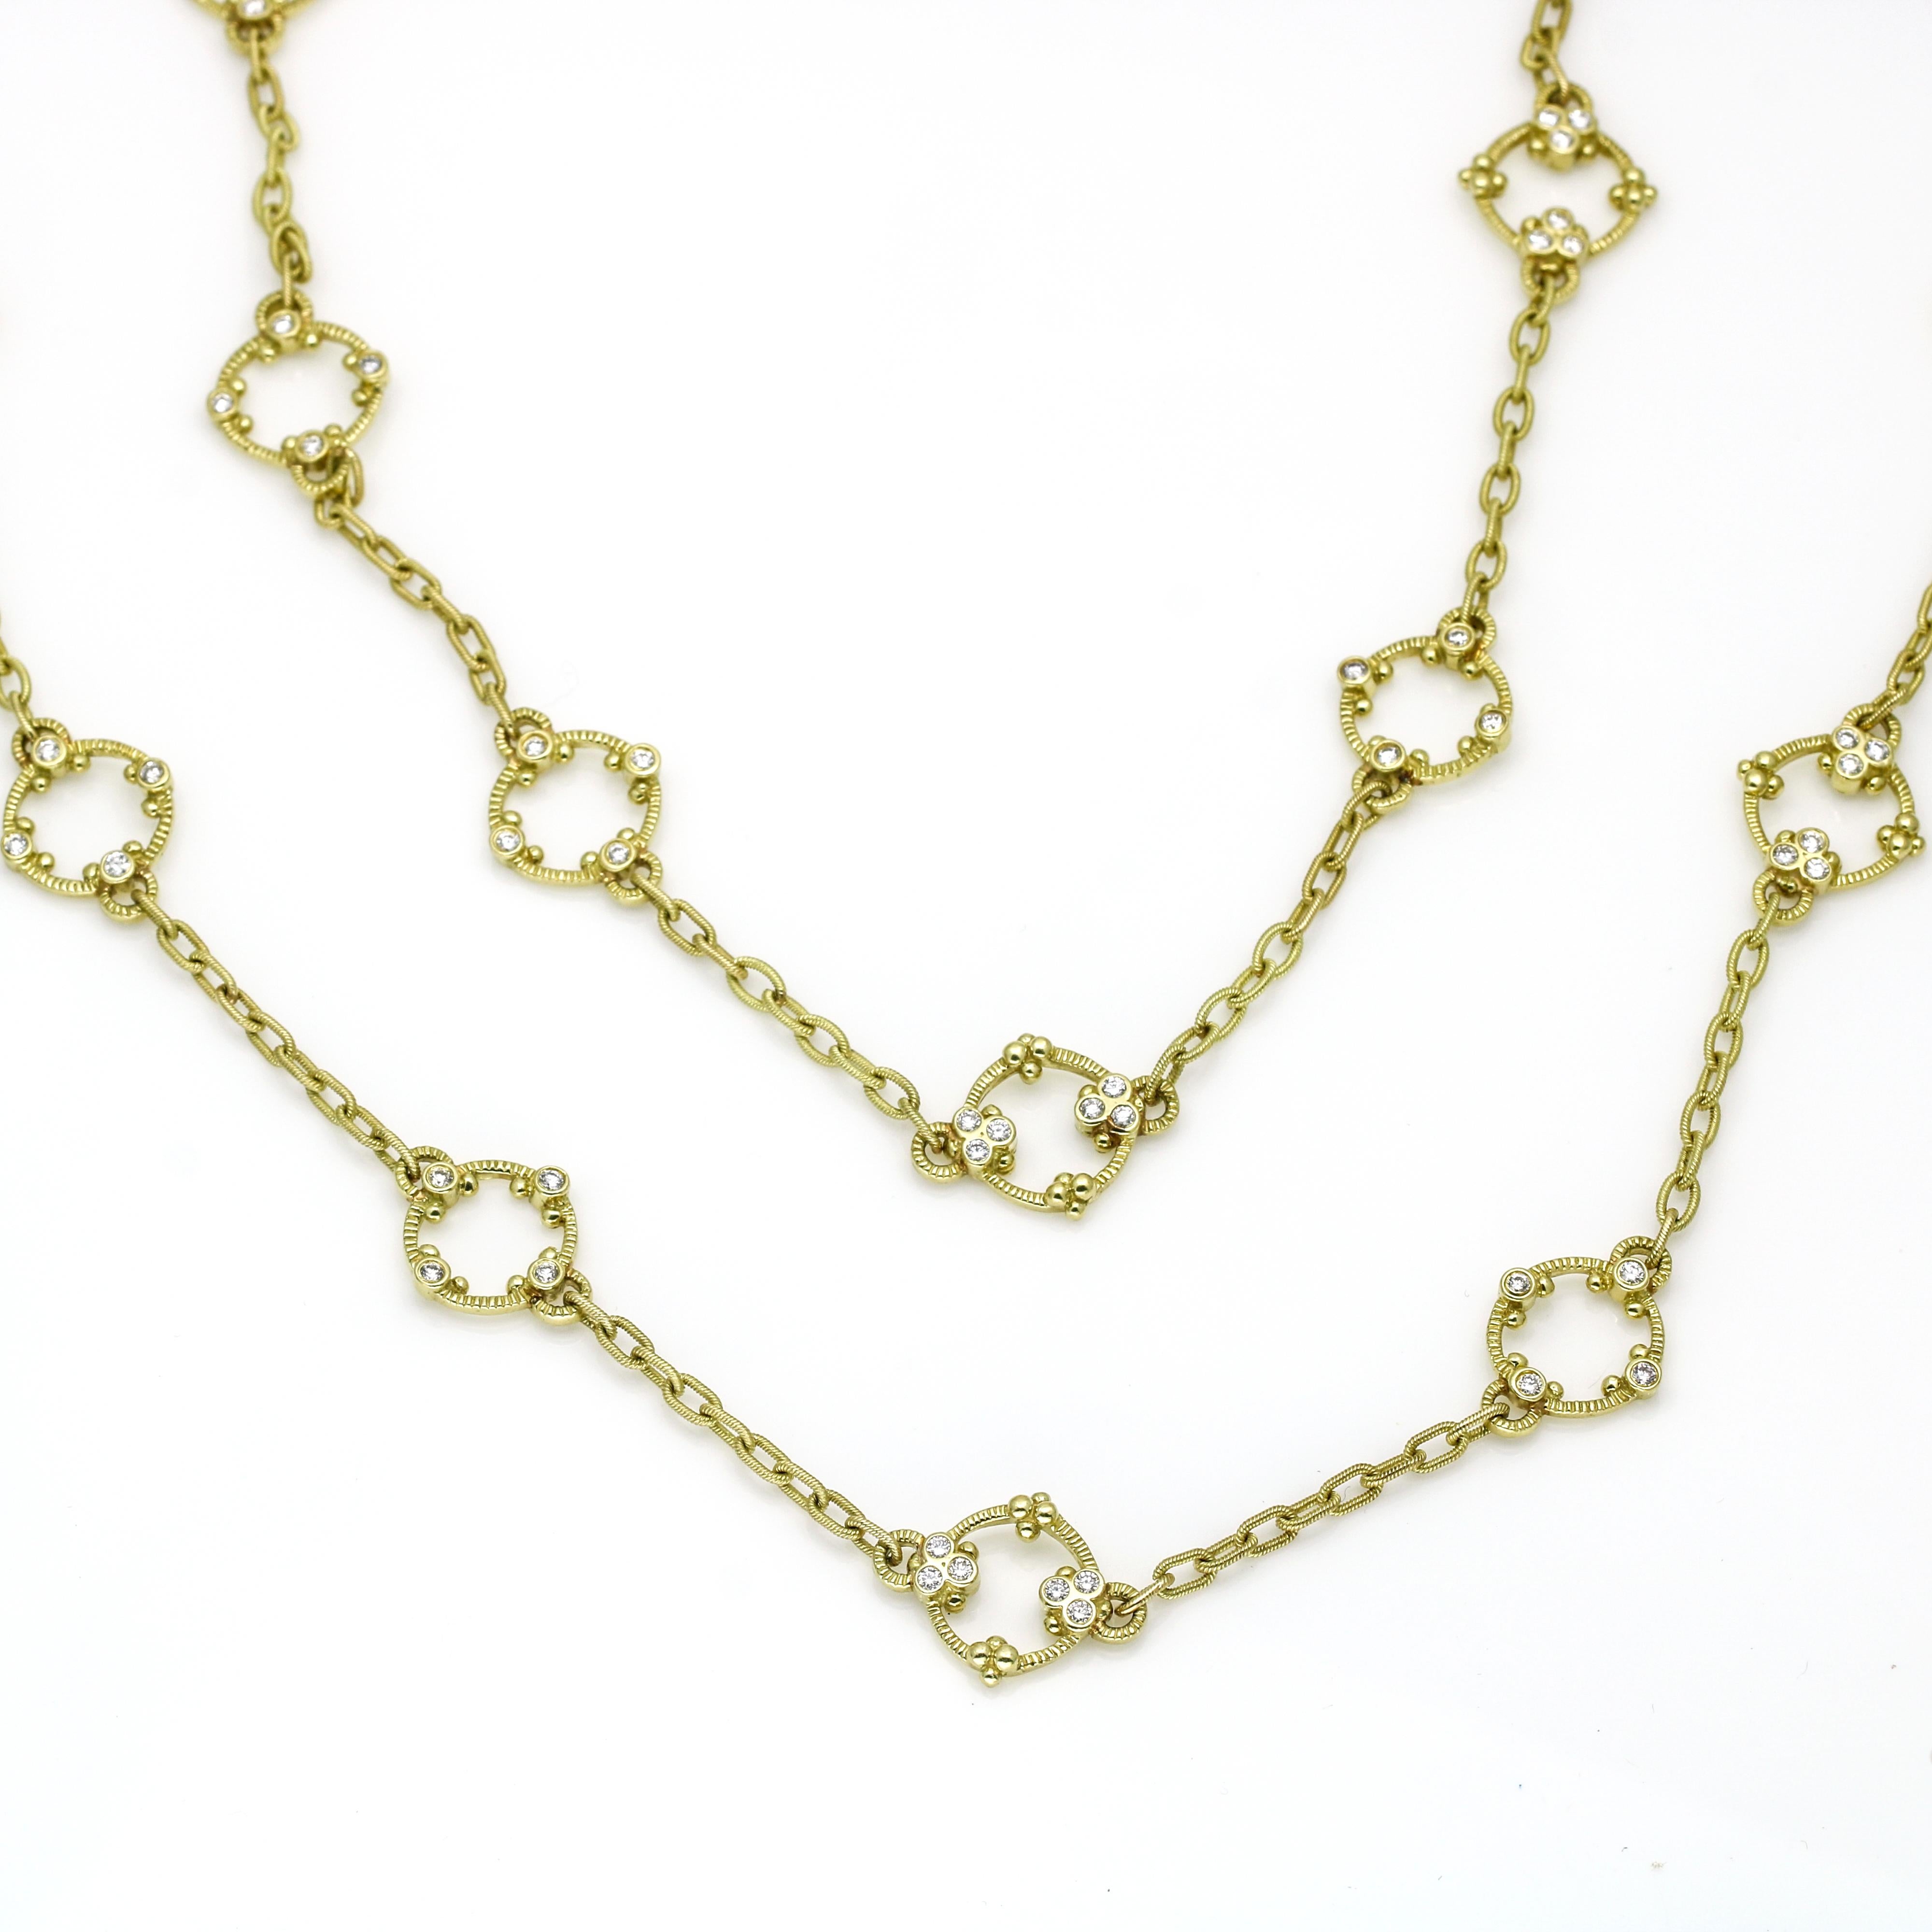 Adorn yourself with elegance wearing the Women's Diamond Long Station Chain Necklace, beautifully crafted in radiant 18k yellow gold. This exquisite 36